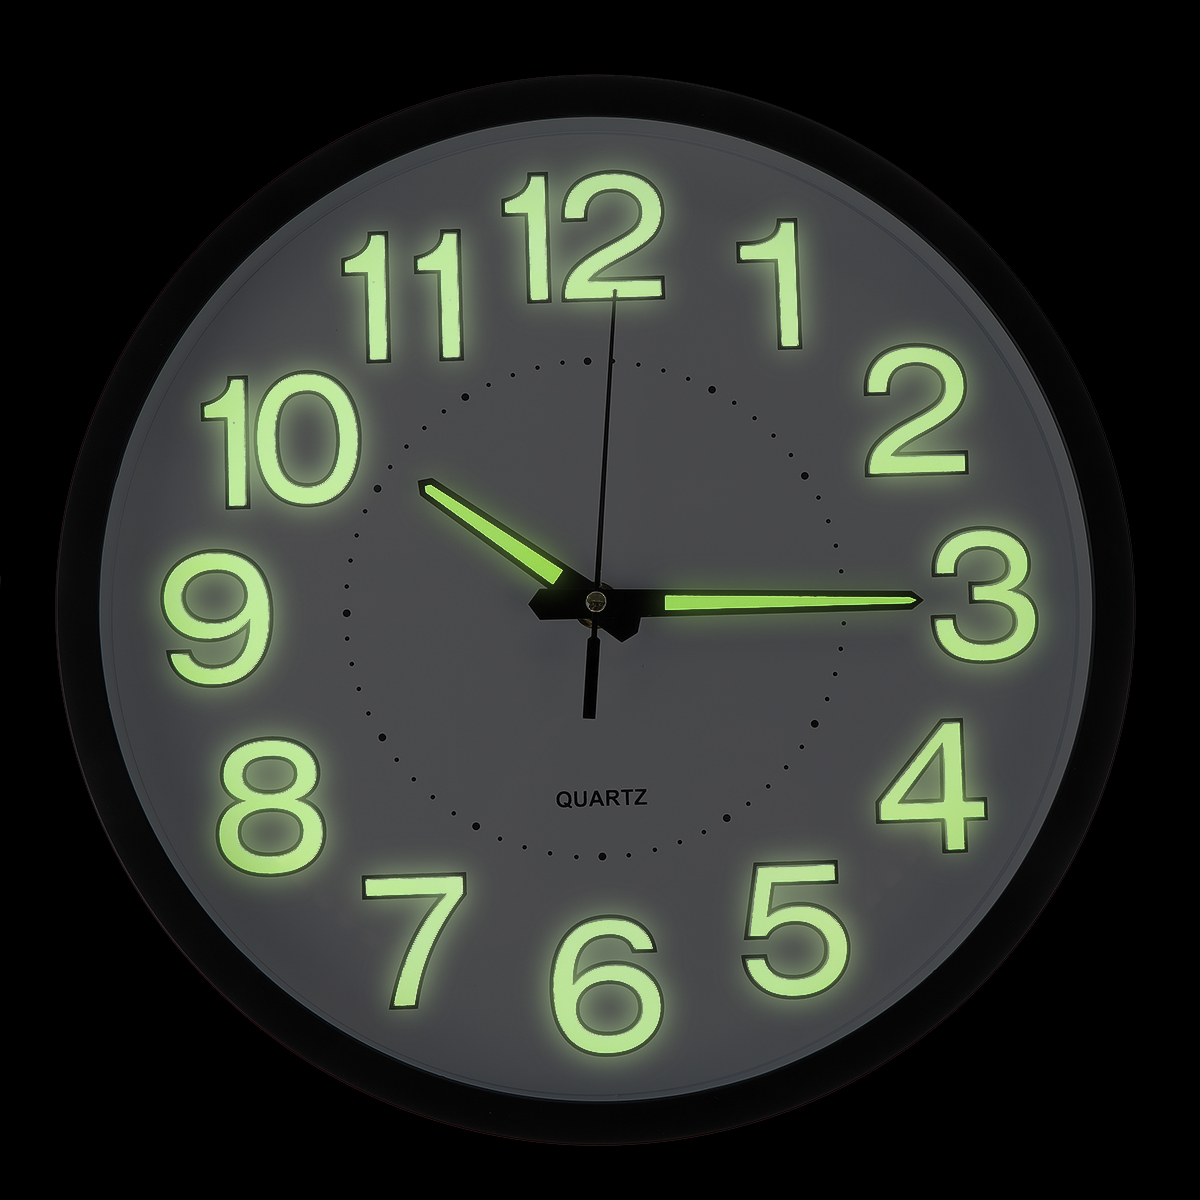 Find 12 Luminous Wall Clock Glow In The Dark Silent Quartz Indoor Outdoor Home for Sale on Gipsybee.com with cryptocurrencies